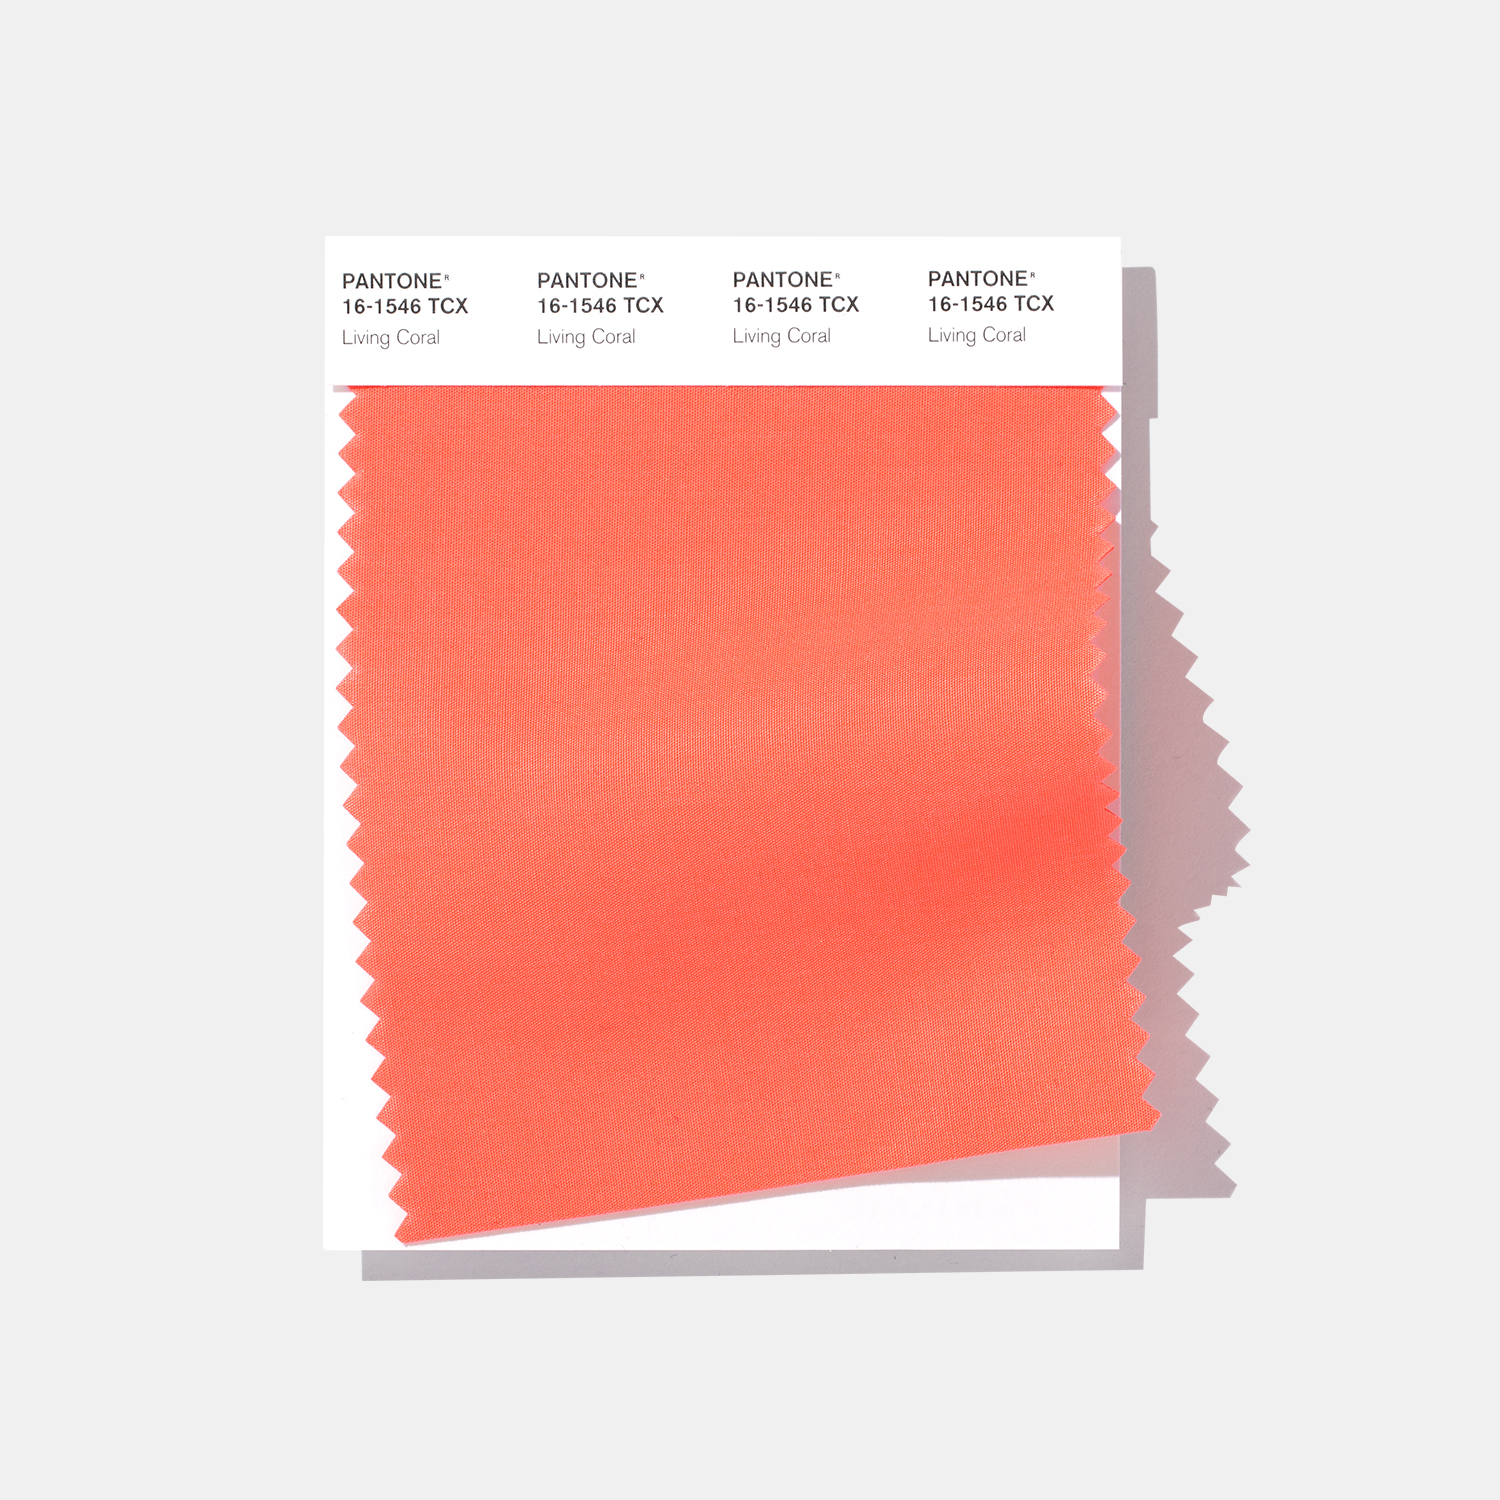 SWCD-pantone-fashion-home-interiors-tcx-cotton-swatch-color-of-the-year-2019-living-coral